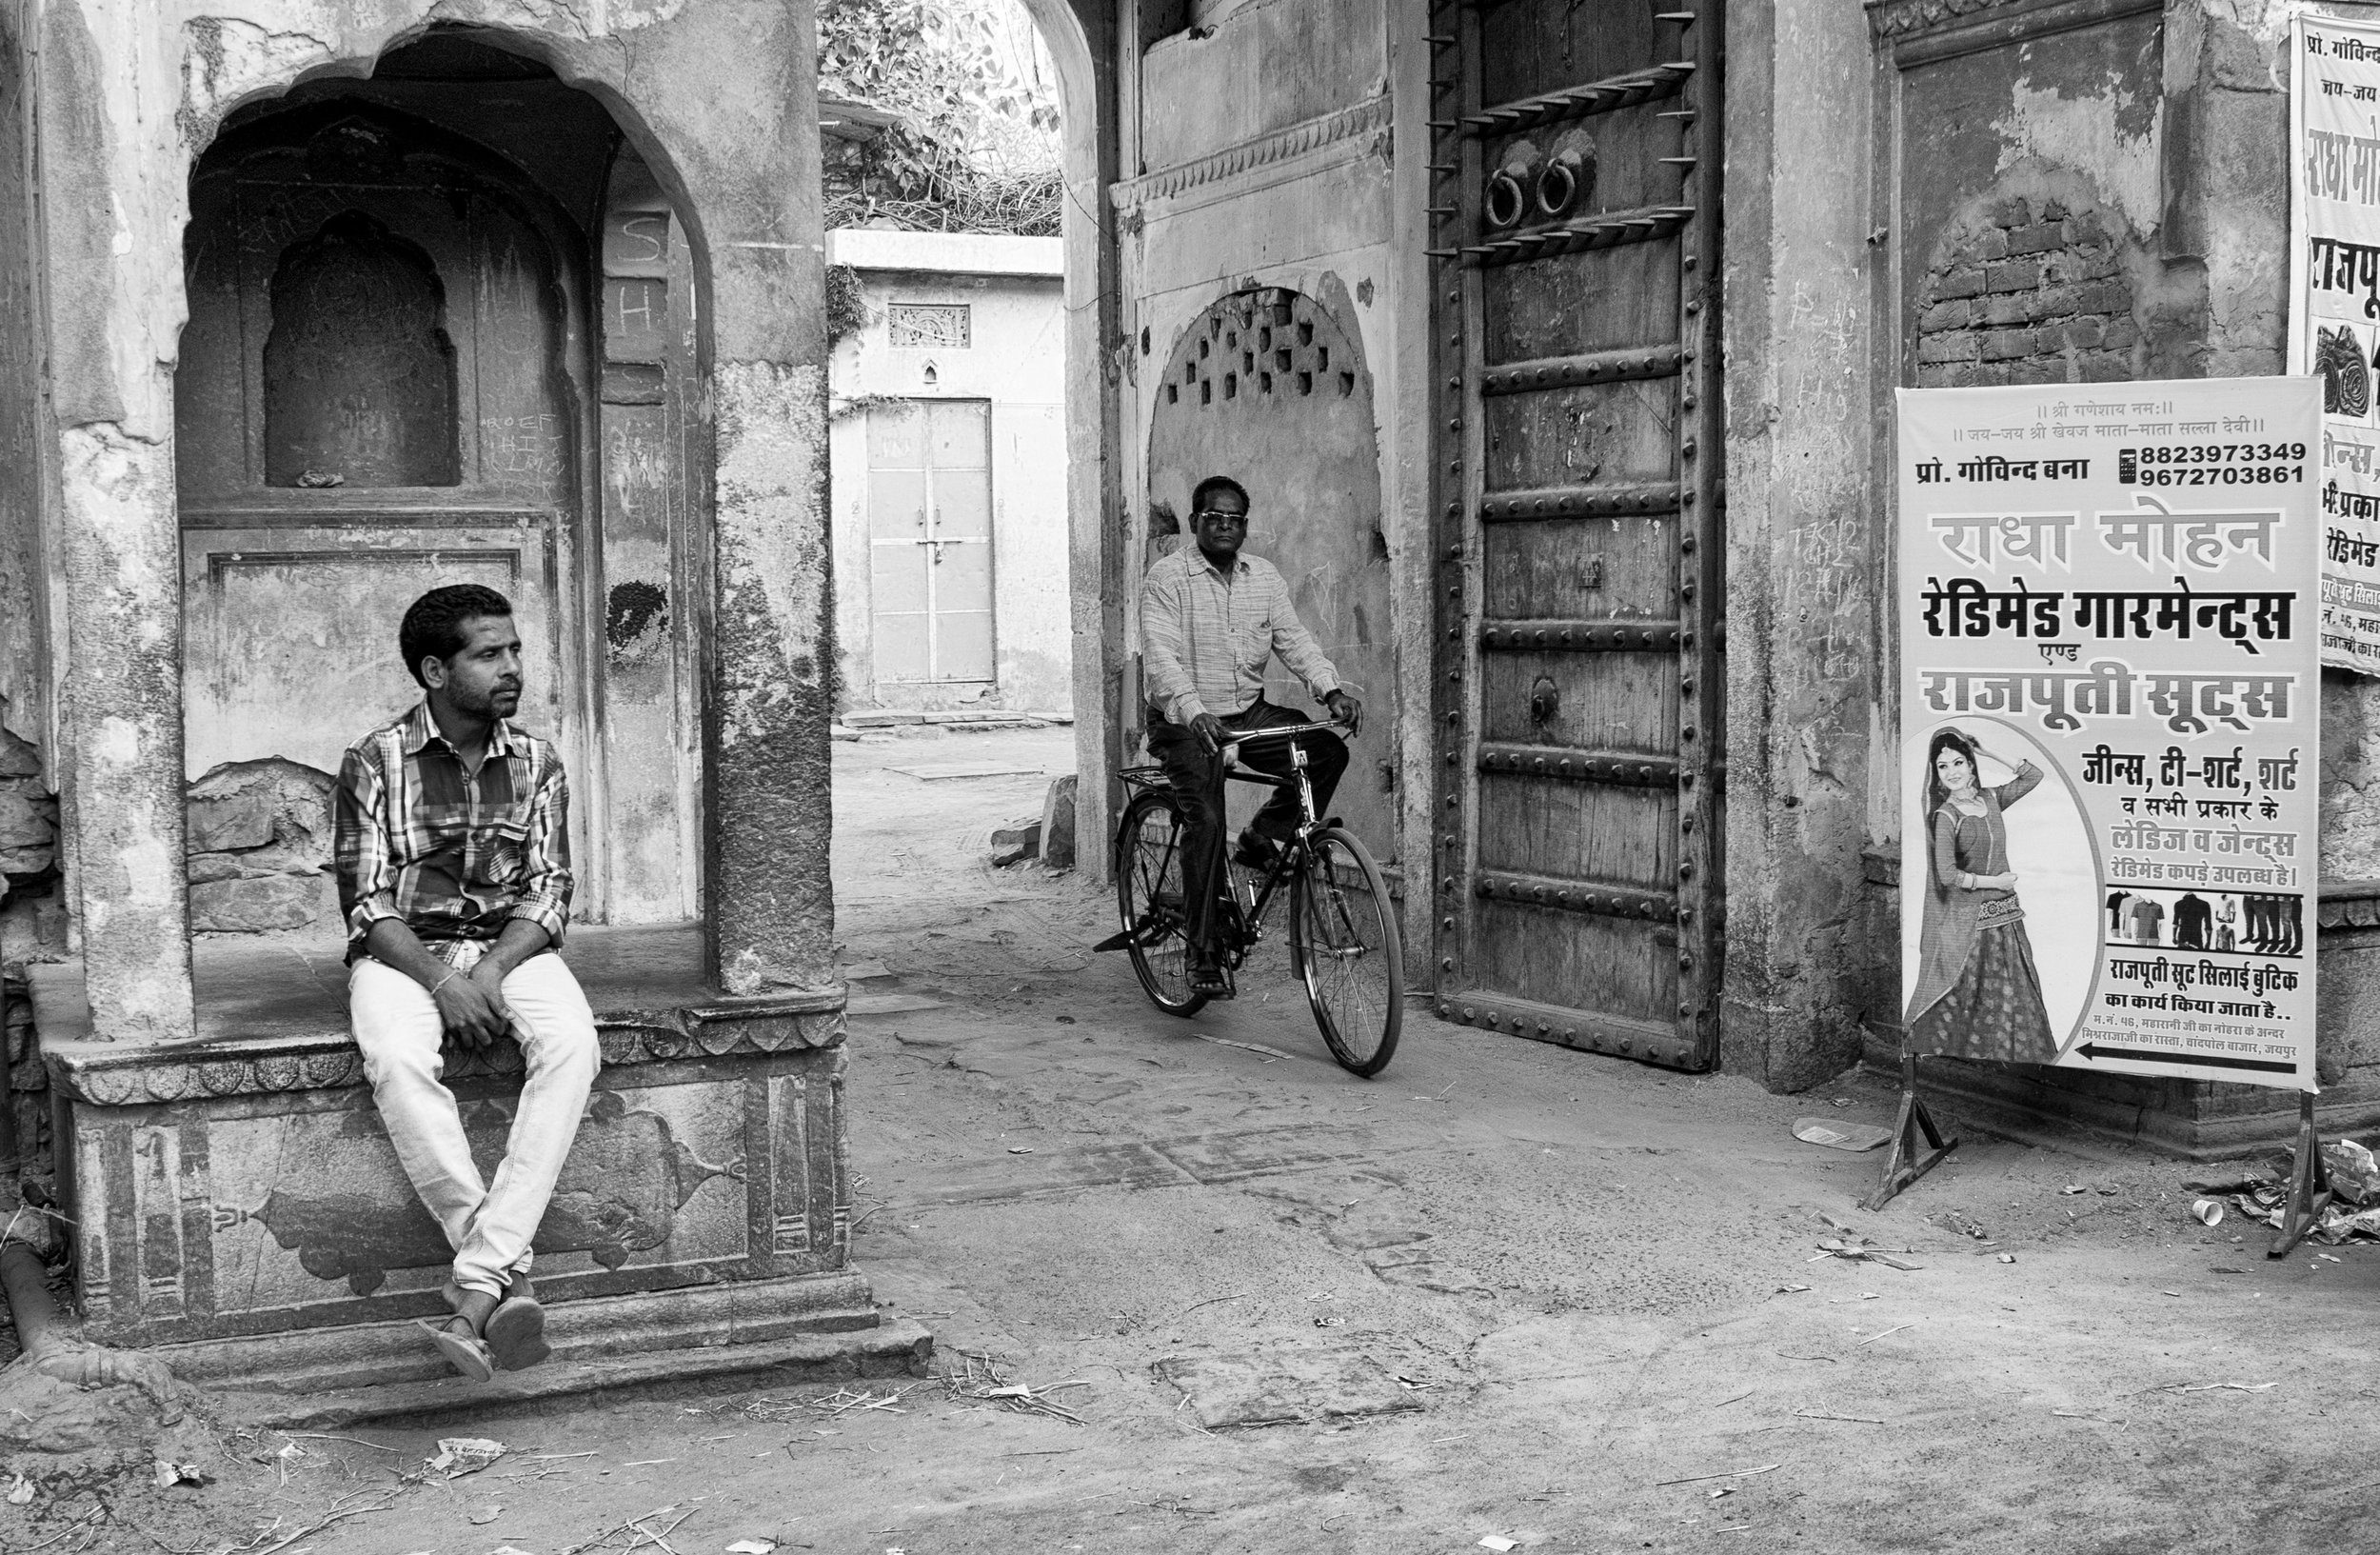 Man Sitting with Other Man on Bicycle on Streets of Jaipur in Black and White - Jaipur, India - Copyright 2016 Ralph Velasco.jpg